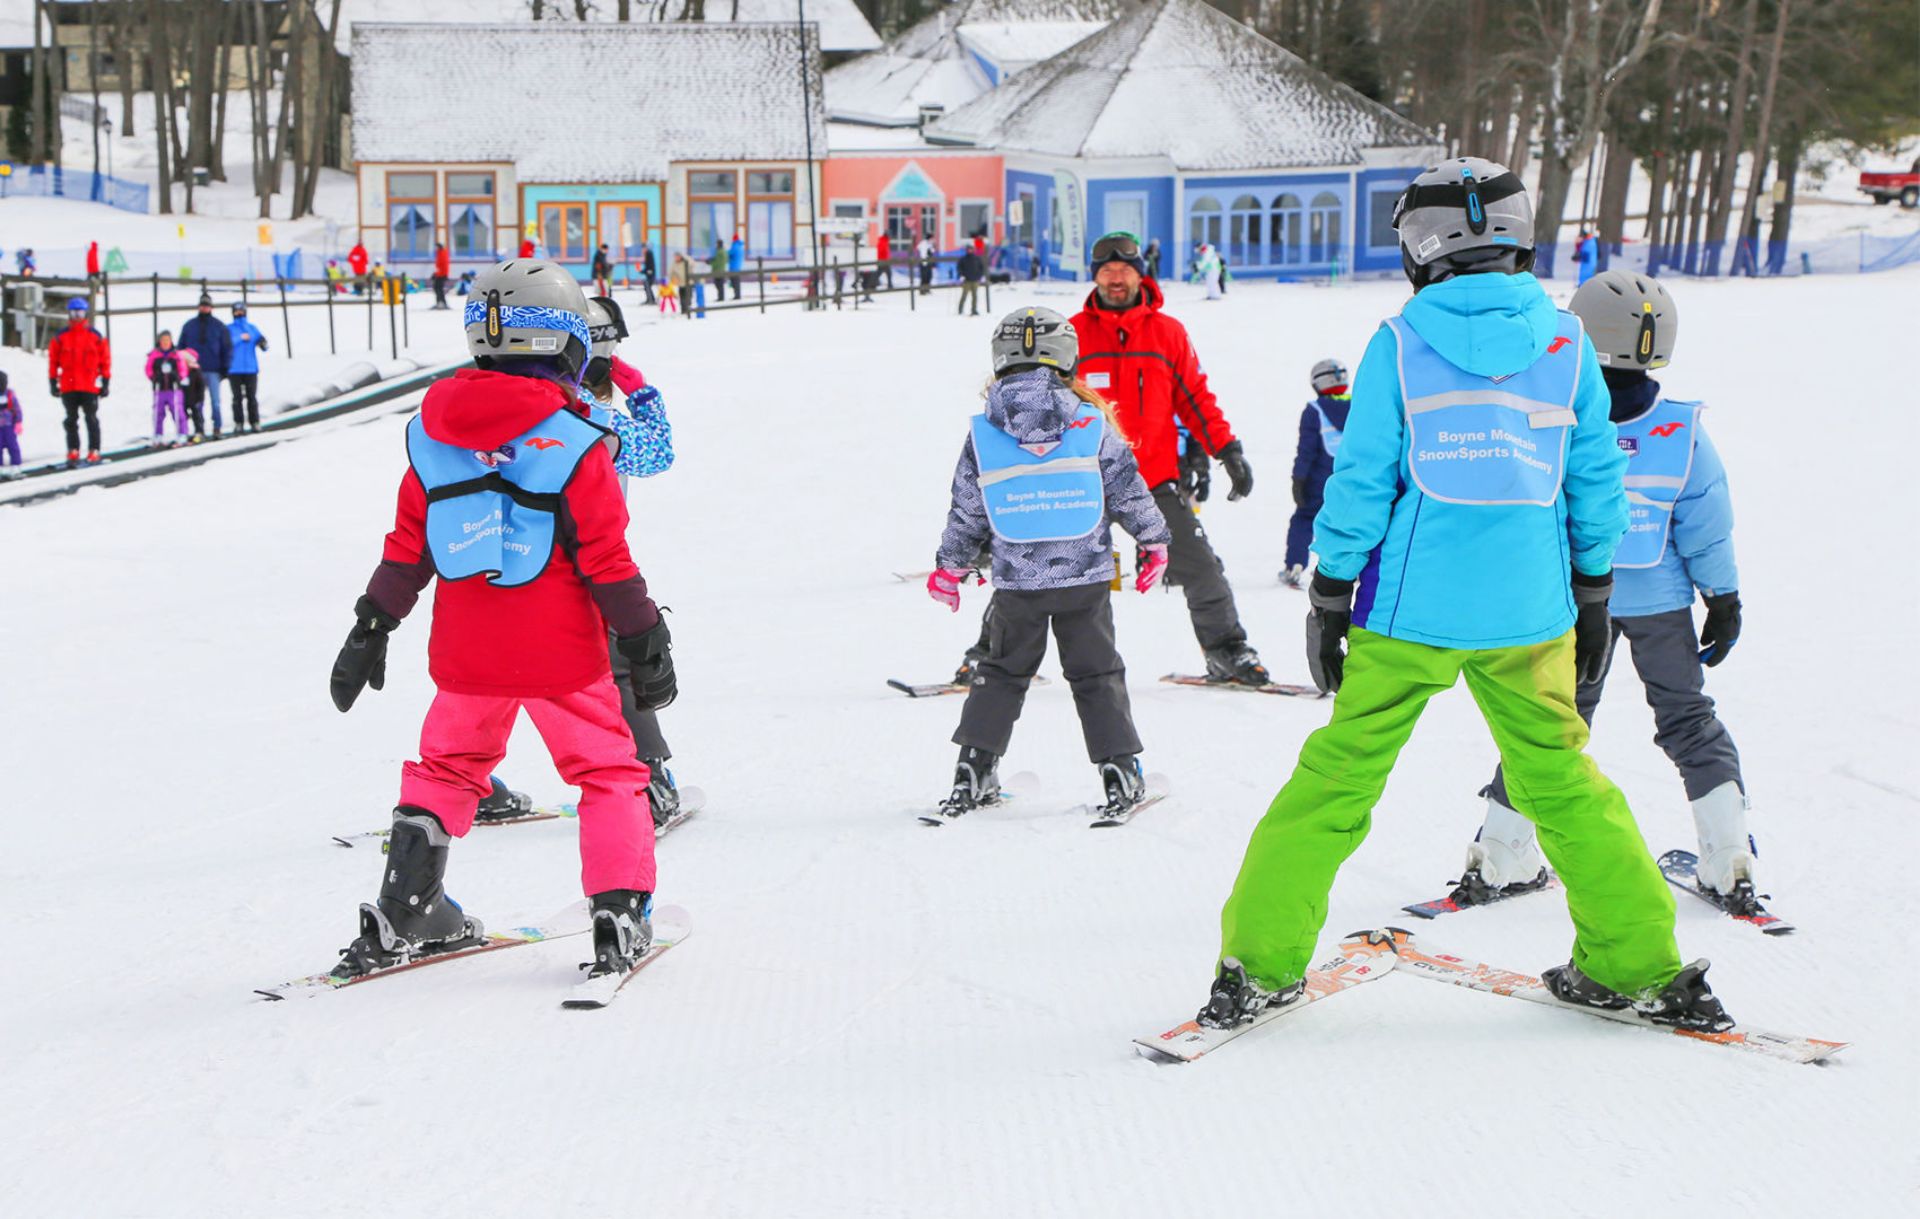 Children Skiing in a Group